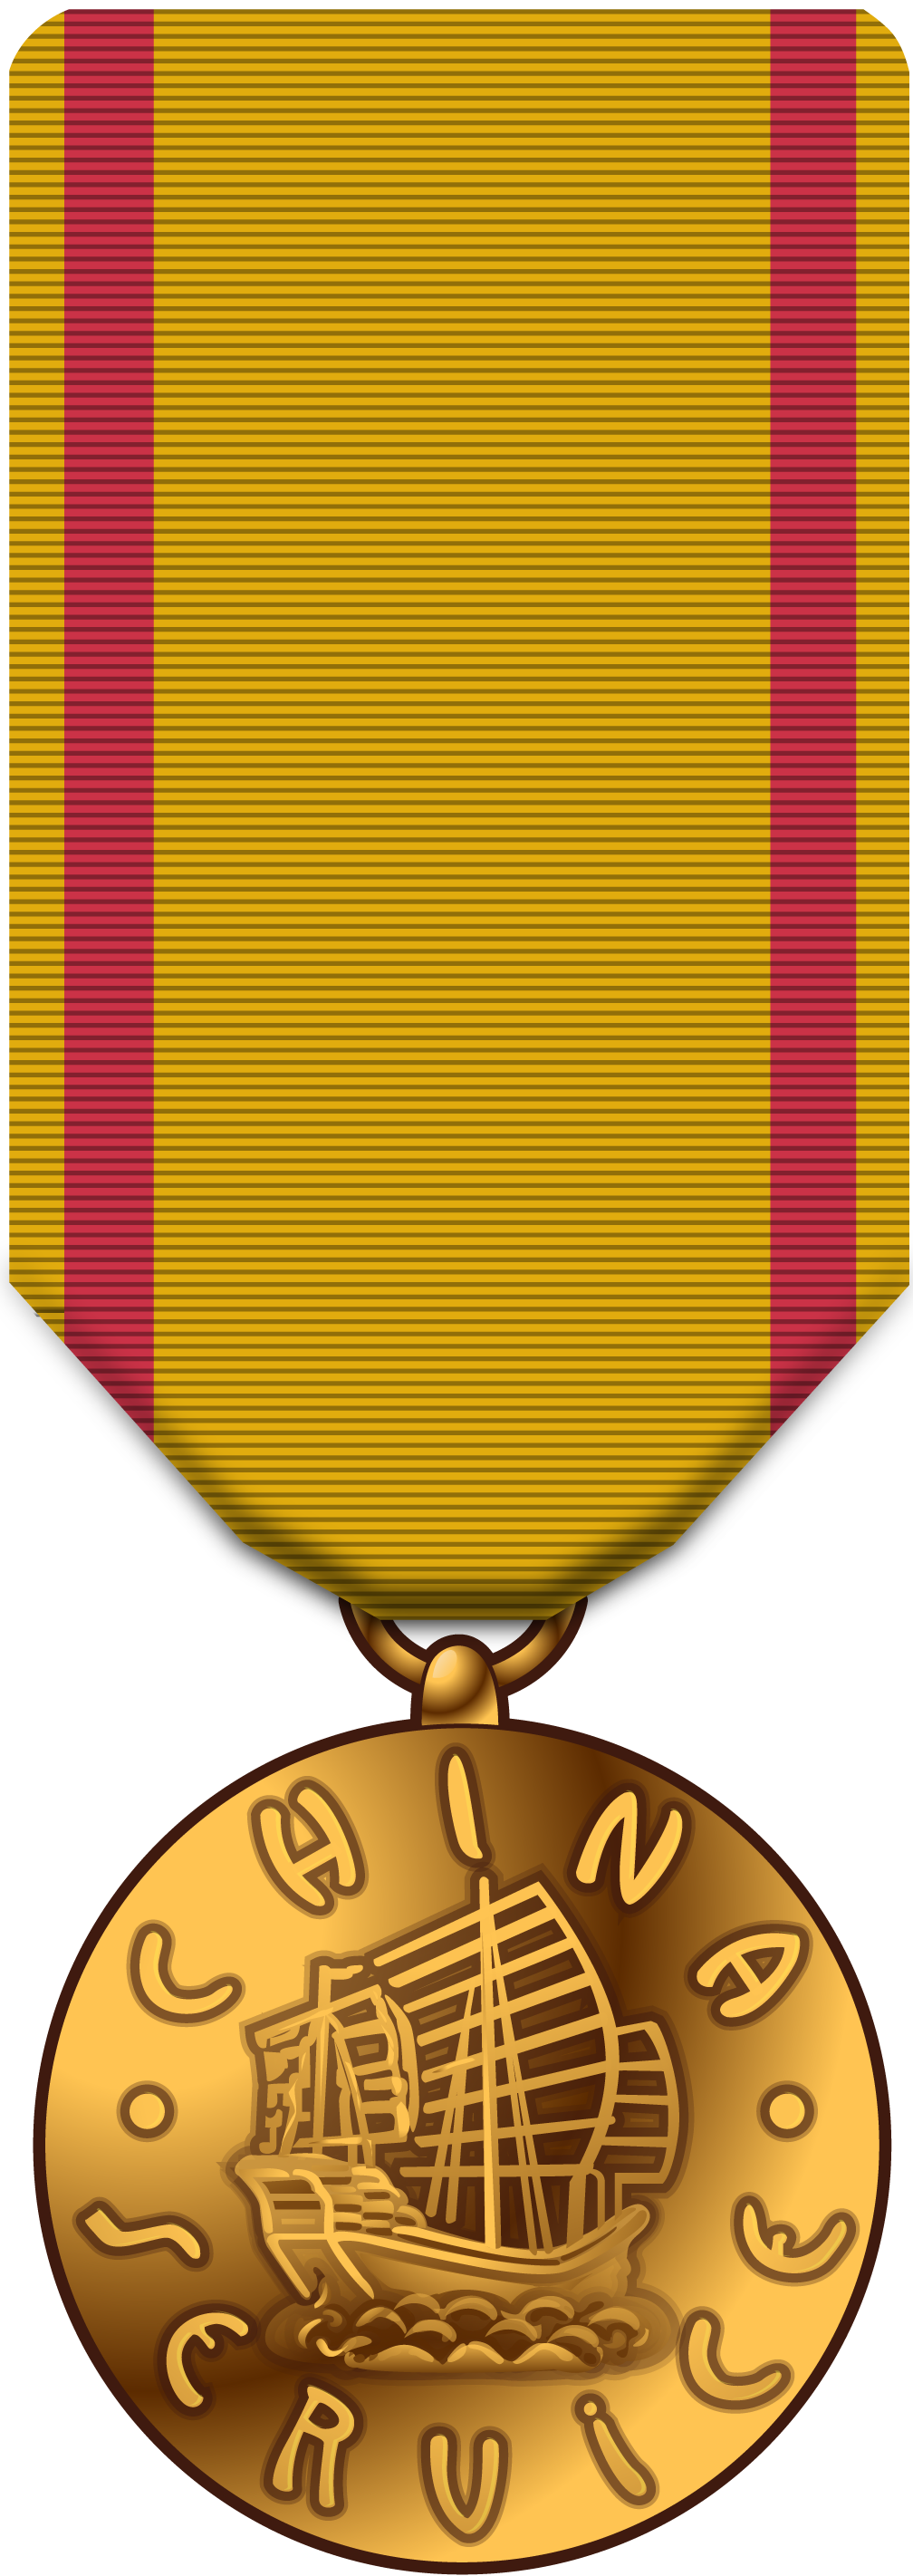 James a burton portsmouth. Medal clipart honorable